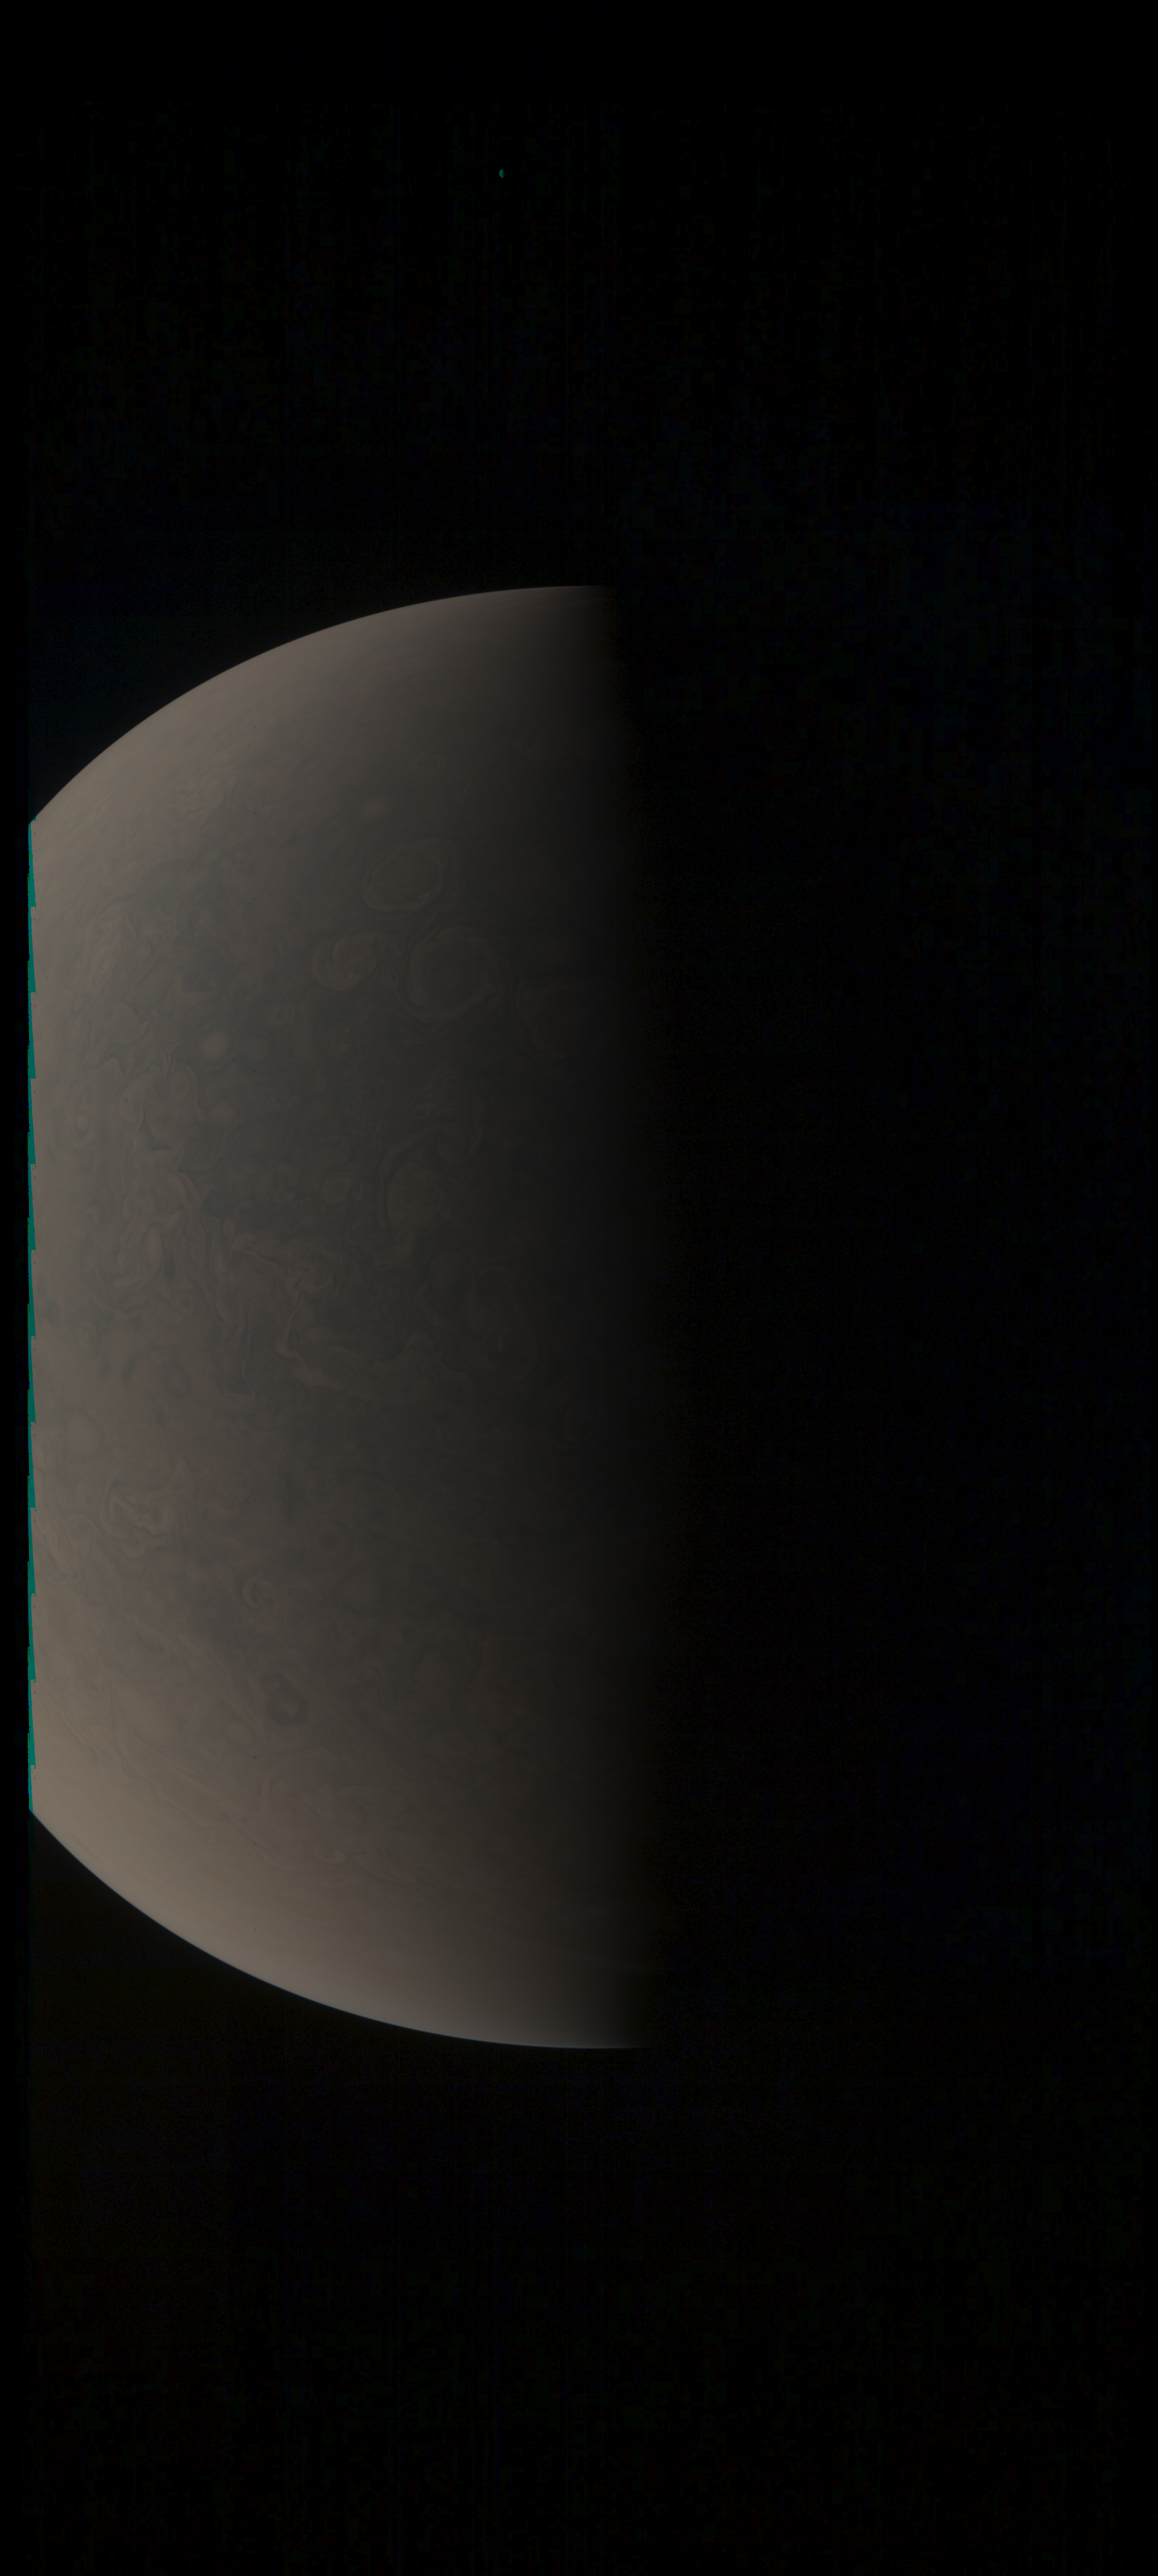 JNCE_2022056_40C00009_V01-raw_proc_hollow_sphere_c_pj_out.BMP_thumbnail_.png